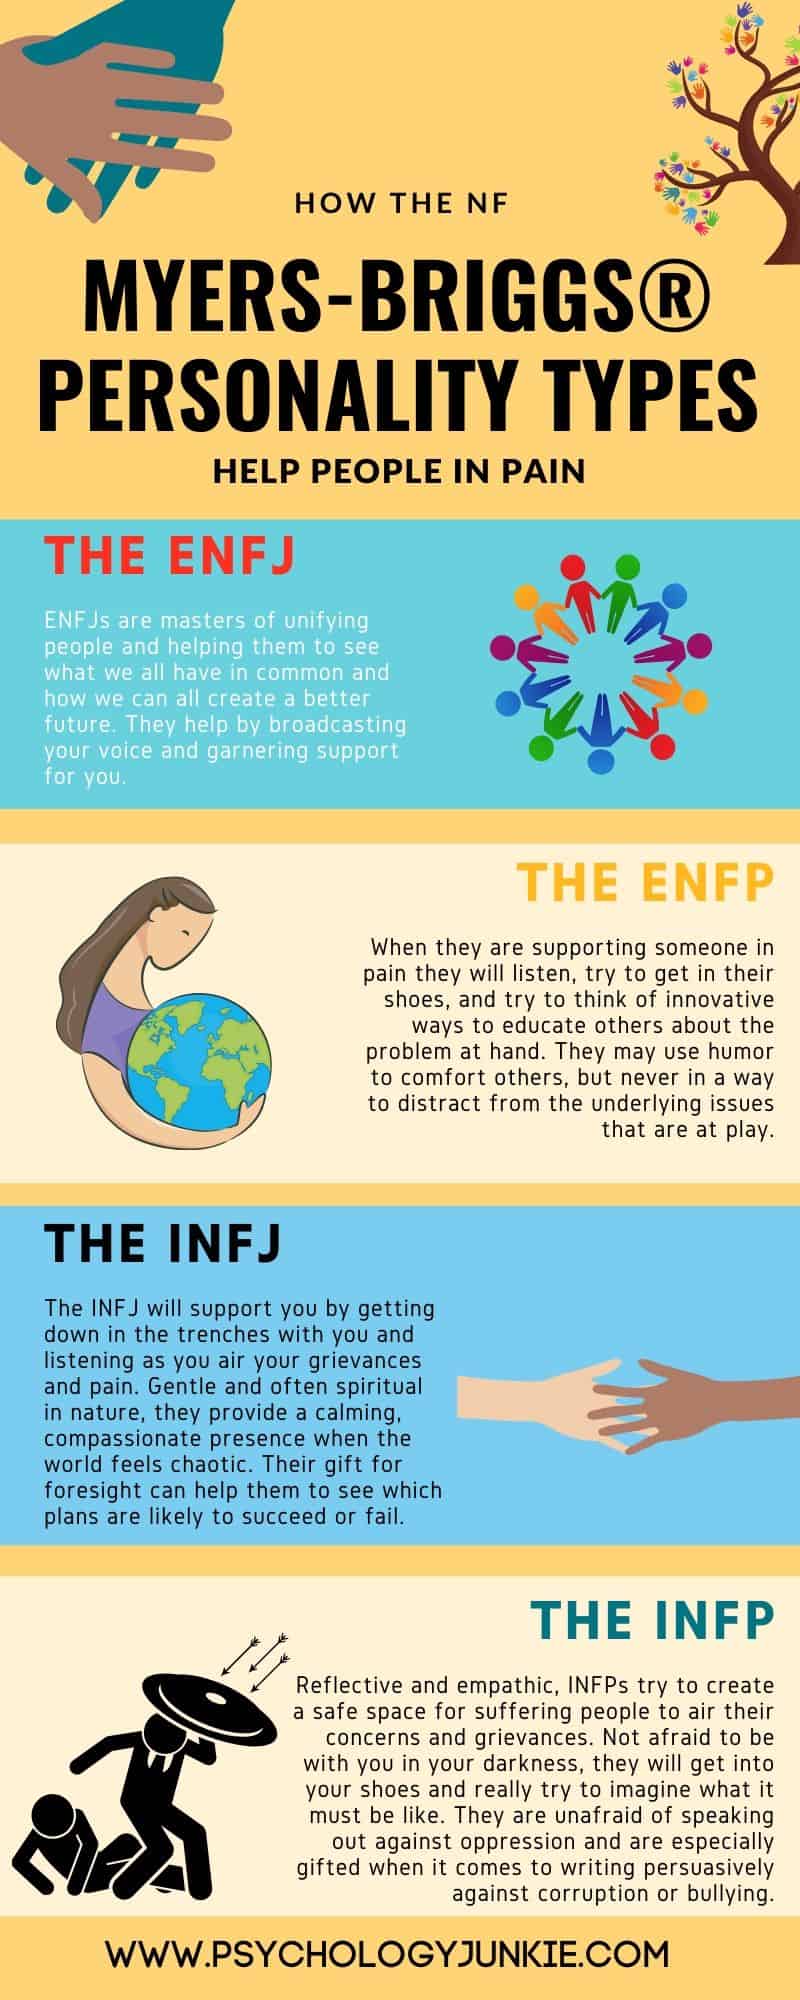 Find out how each of the Intuitive-Feeling Myers-Briggs® personality types helps people in pain. #INFJ #INFP #ENFJ #ENFP